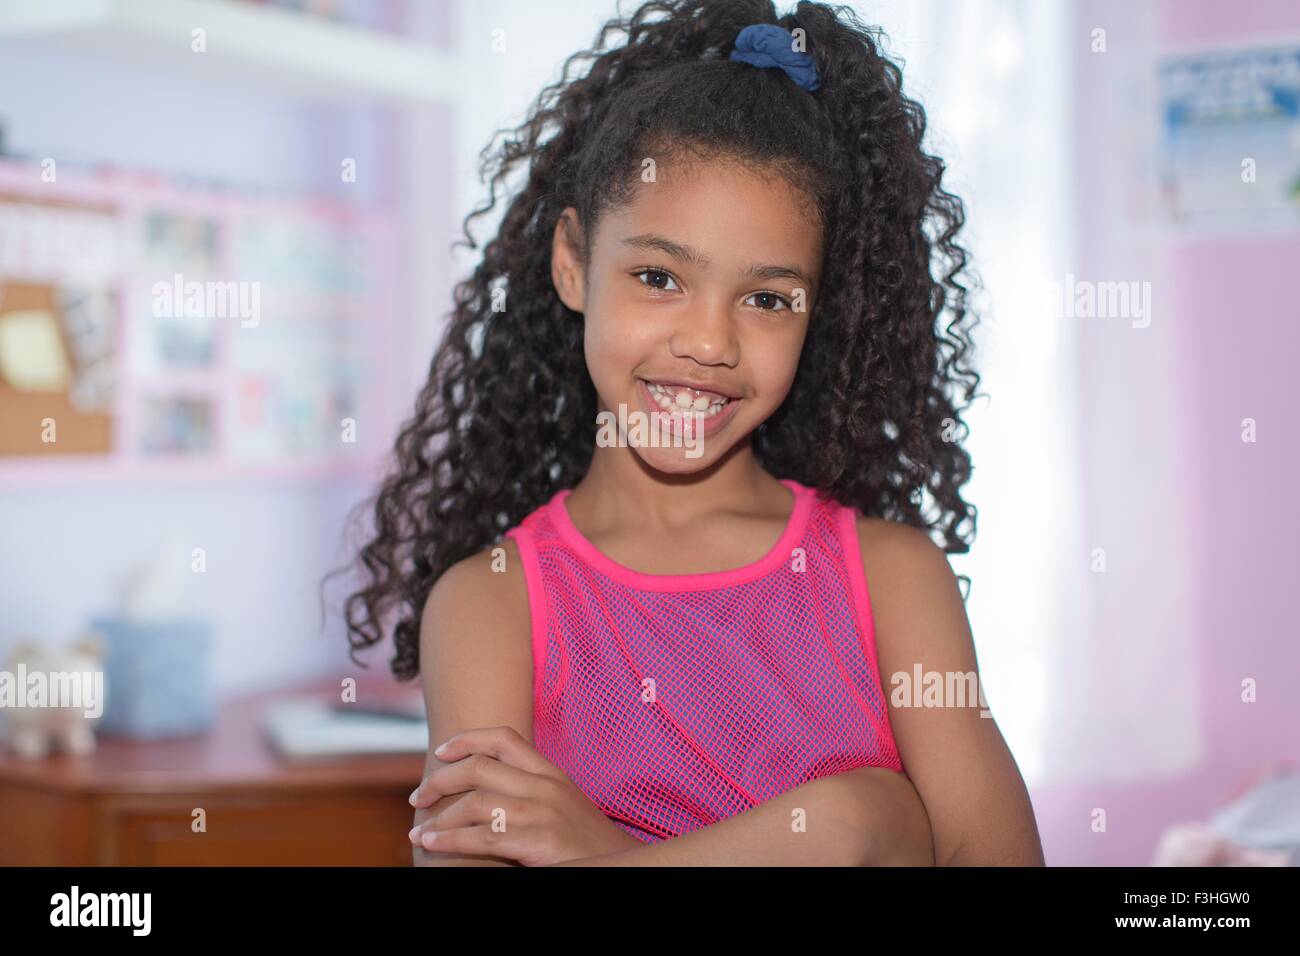 Portrait of girl with black curly hair, arms folded, looking at camera smiling Stock Photo